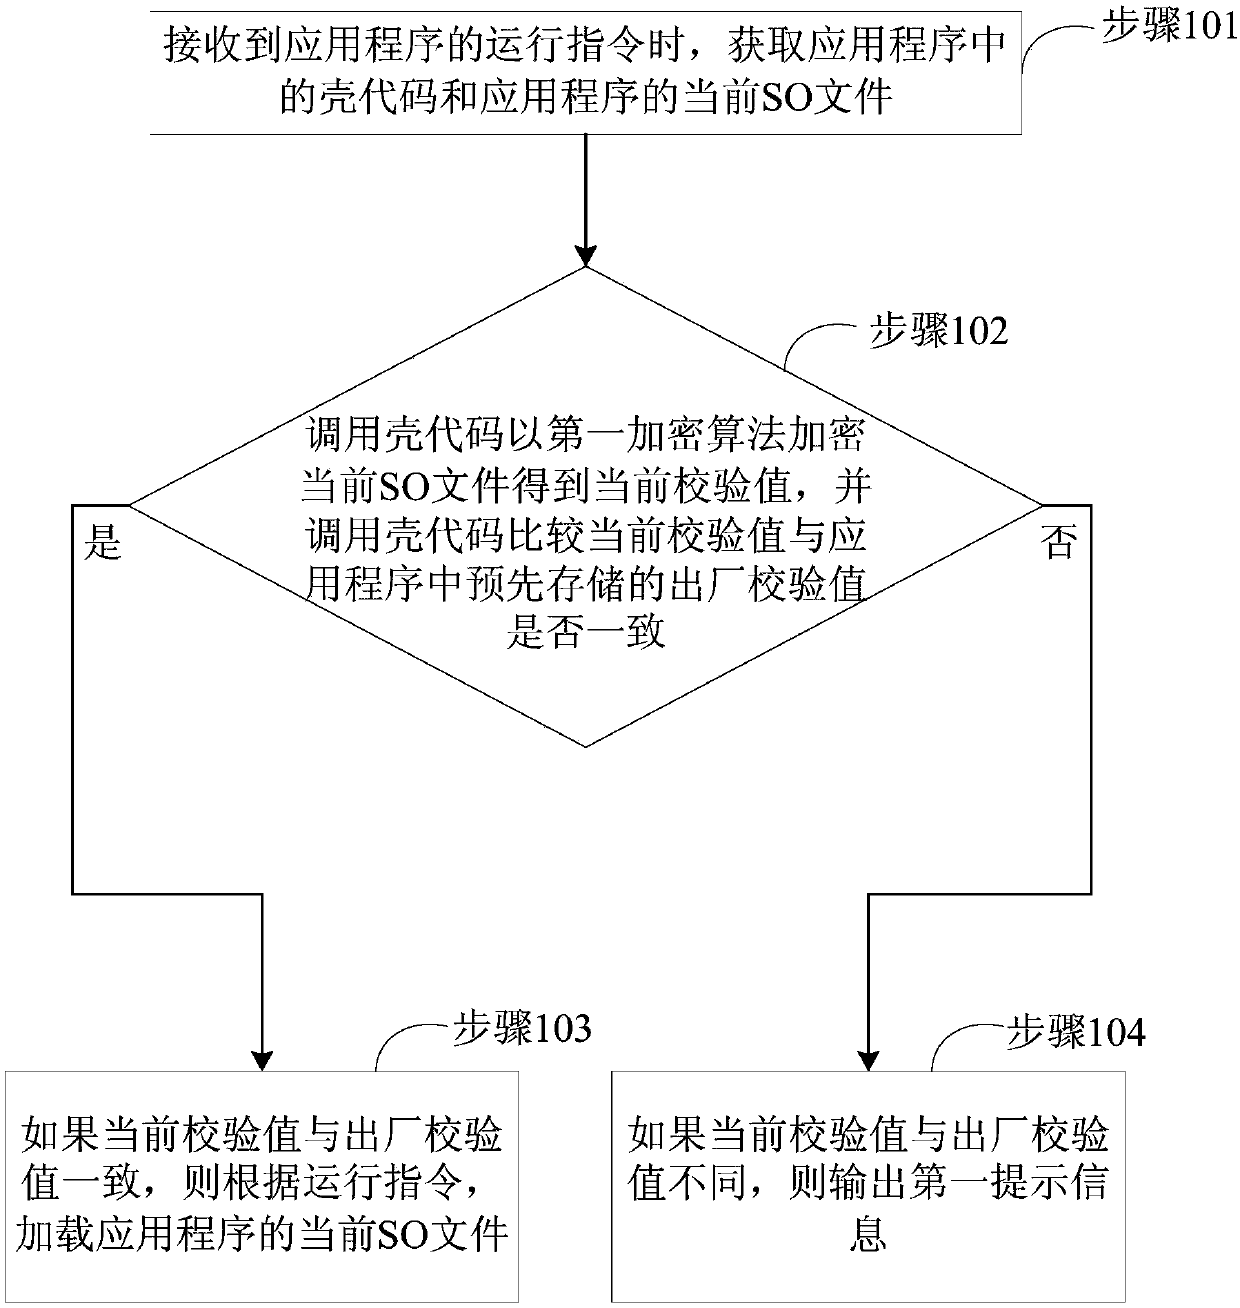 Method and device for loading SO (Shared Object) file in application program